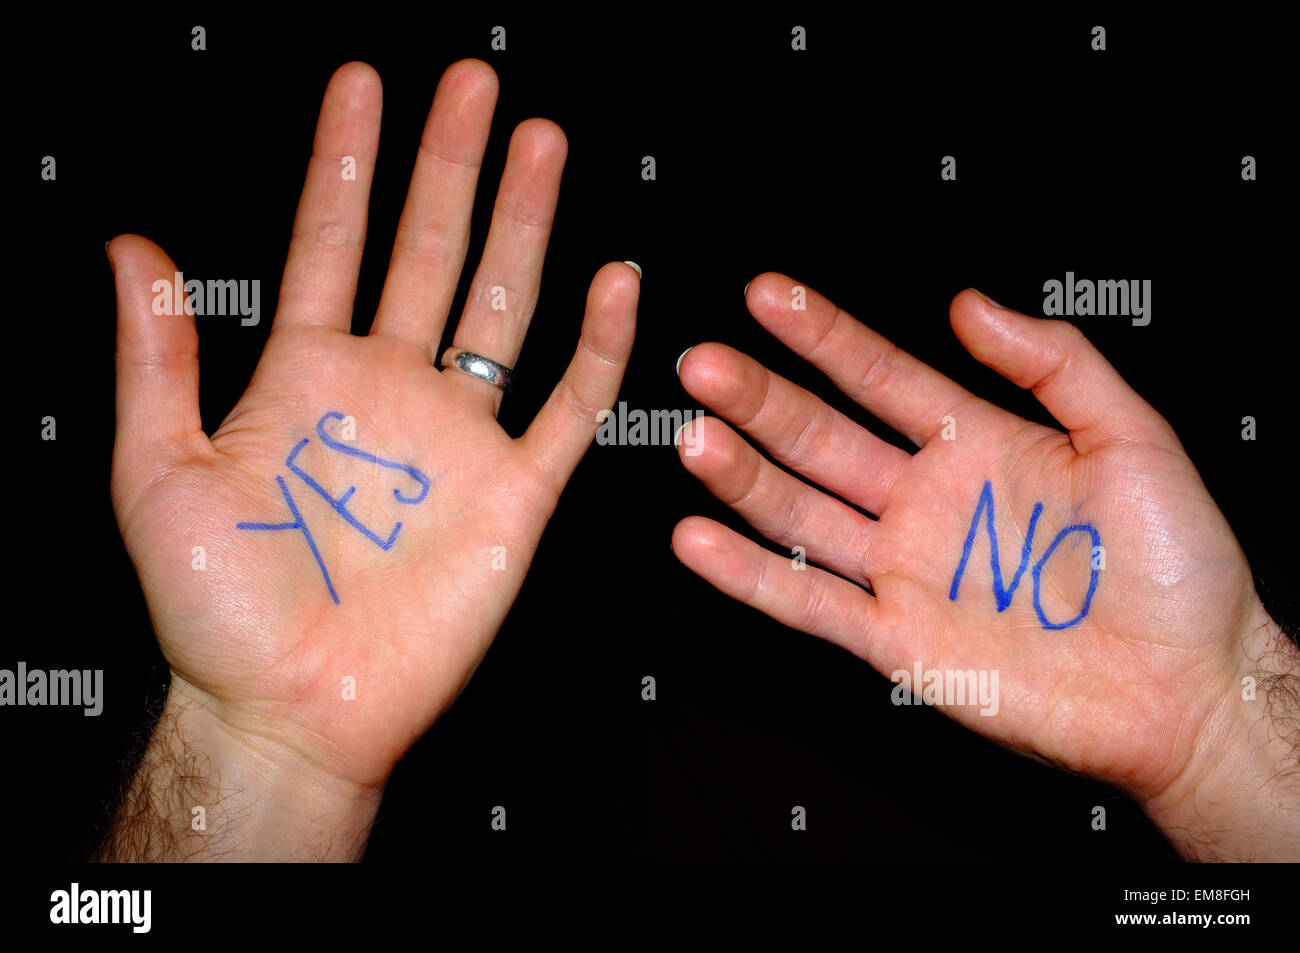 Two white hands with the words "yes" and "no" written on them against a black background. Stock Photo